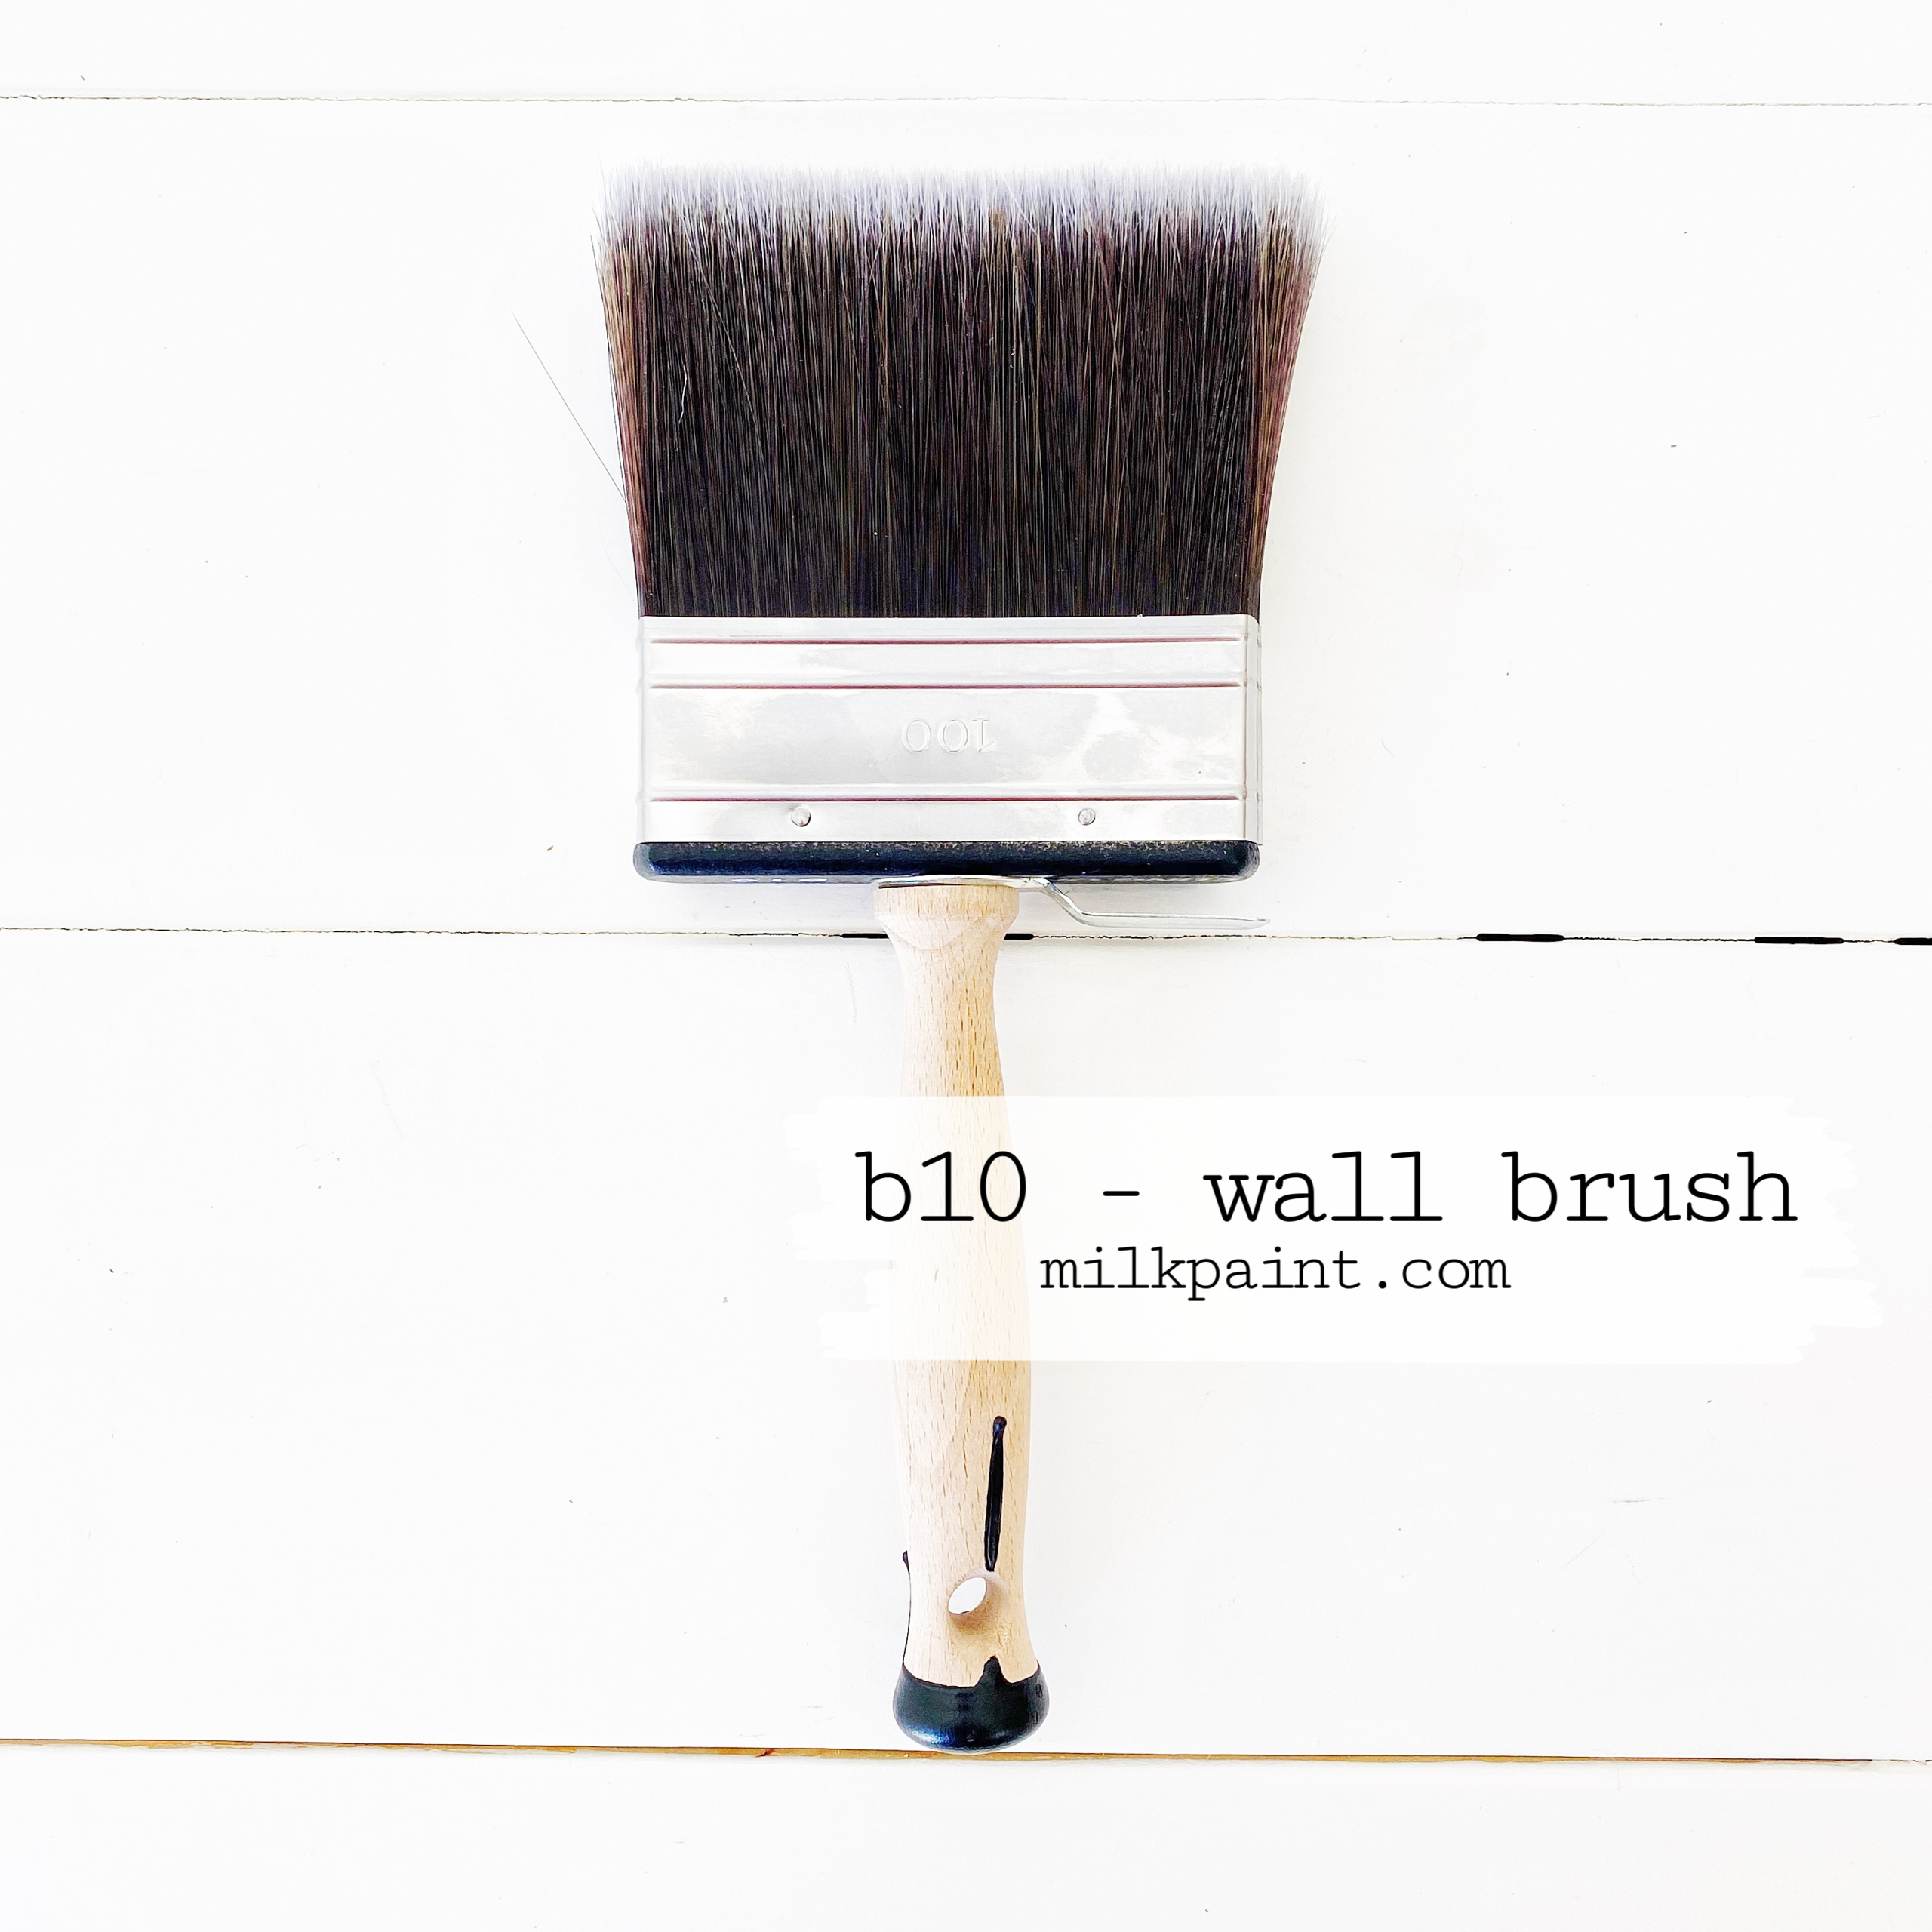 Cling On! Wall Paint Brush #100 for Chalk Paint and all Water Based Paint